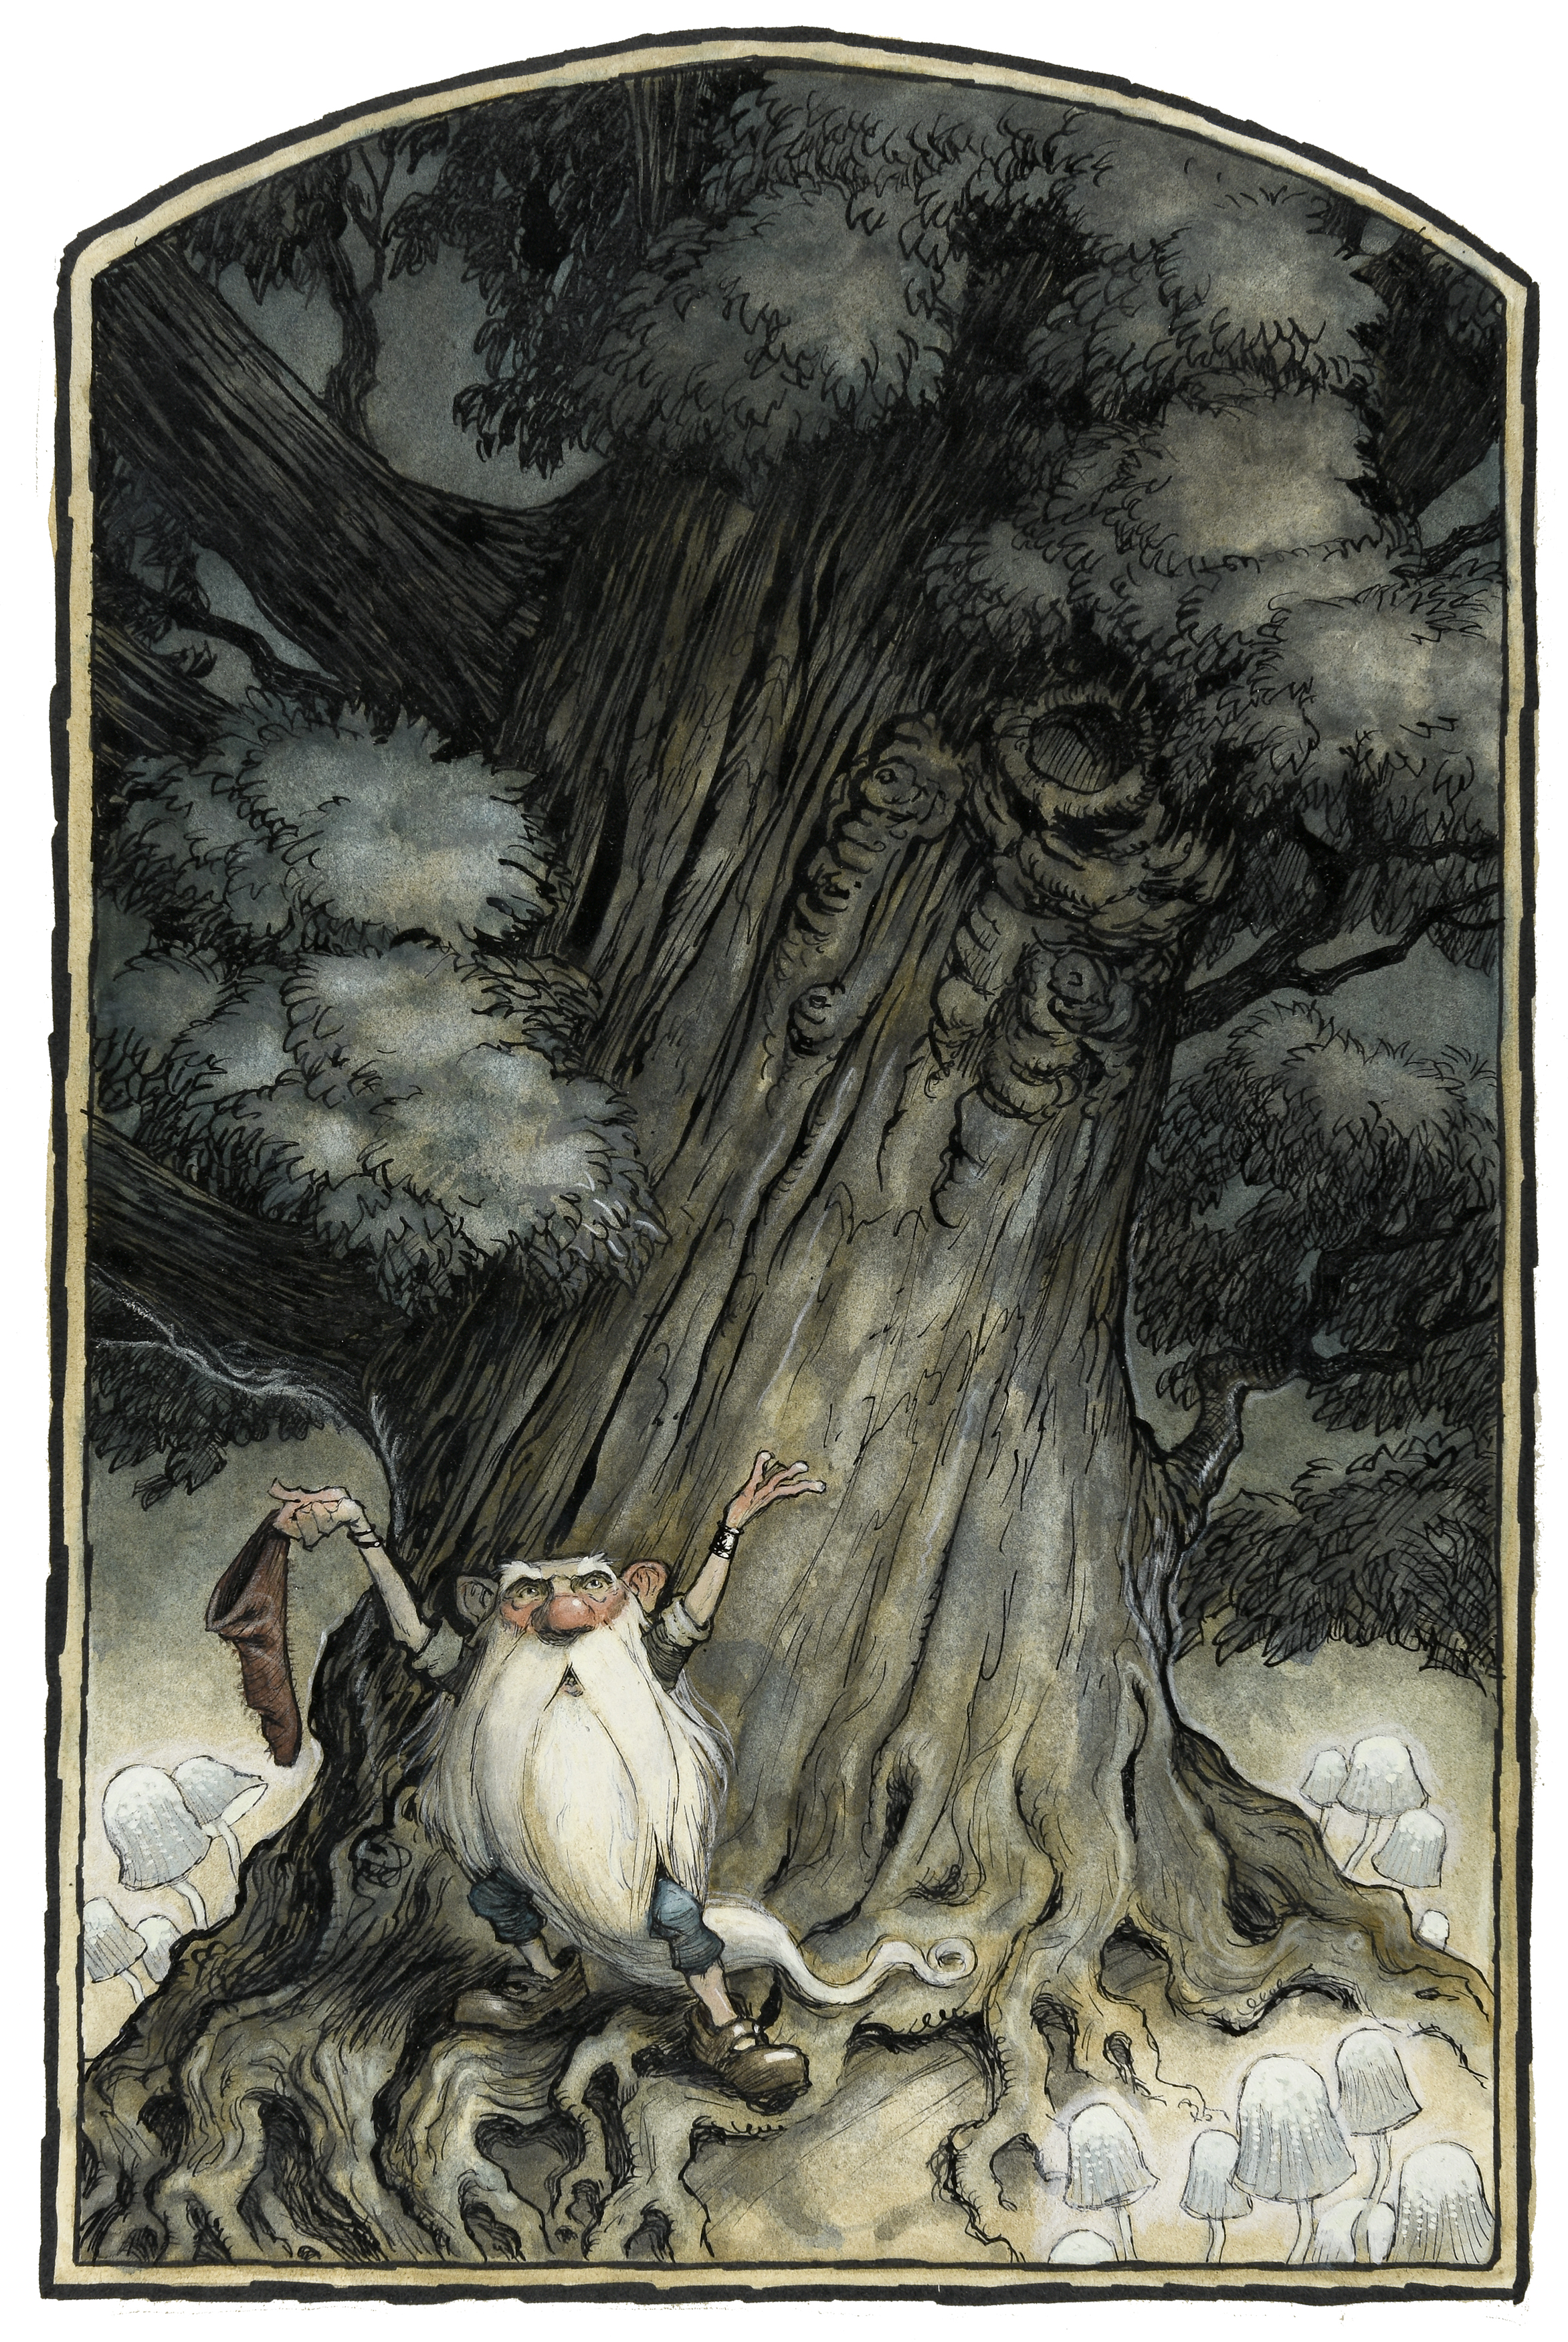 Illustration of bearded magical being next to large tree. 